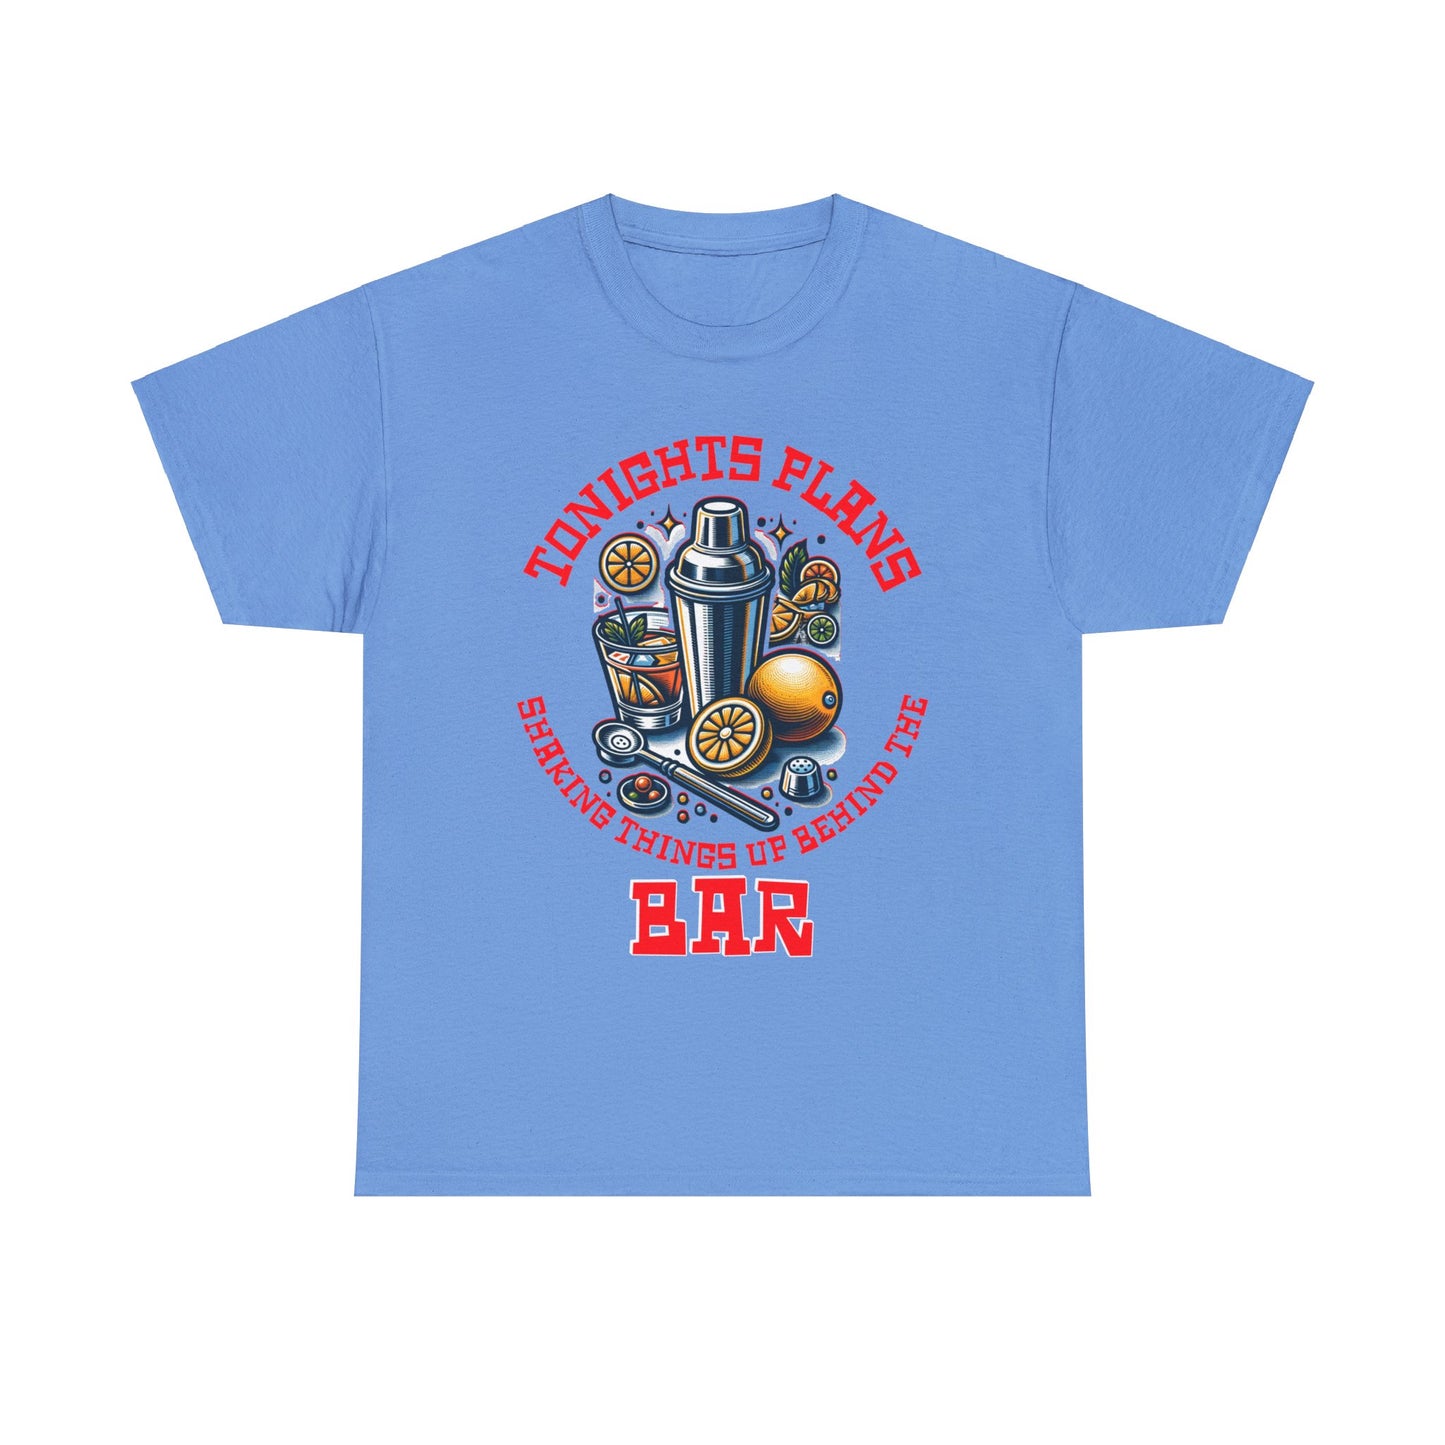 BARTENDER SHAKING THINGS UP ON FRONT  Unisex Heavy Cotton Tee